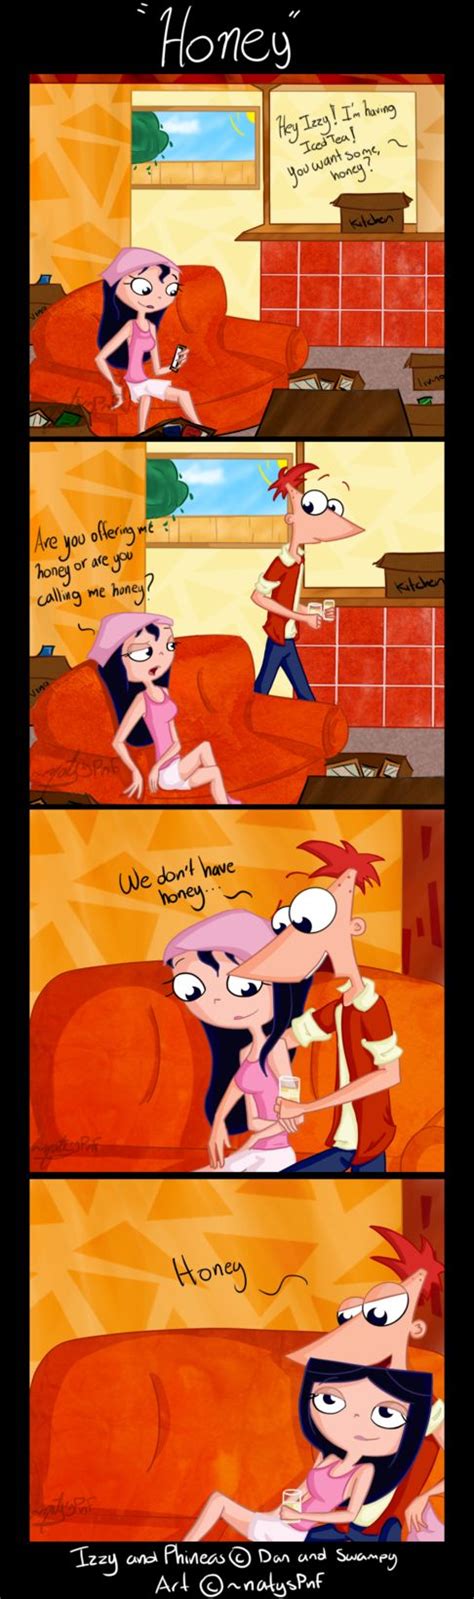 Attracting Jeremy comic porn. 117.8k Views | 10 Images 348 42 IlPanza Breast Expansion Parody: Phineas And Ferb Parody: Star Vs The Forces Of Evil. 11 months.